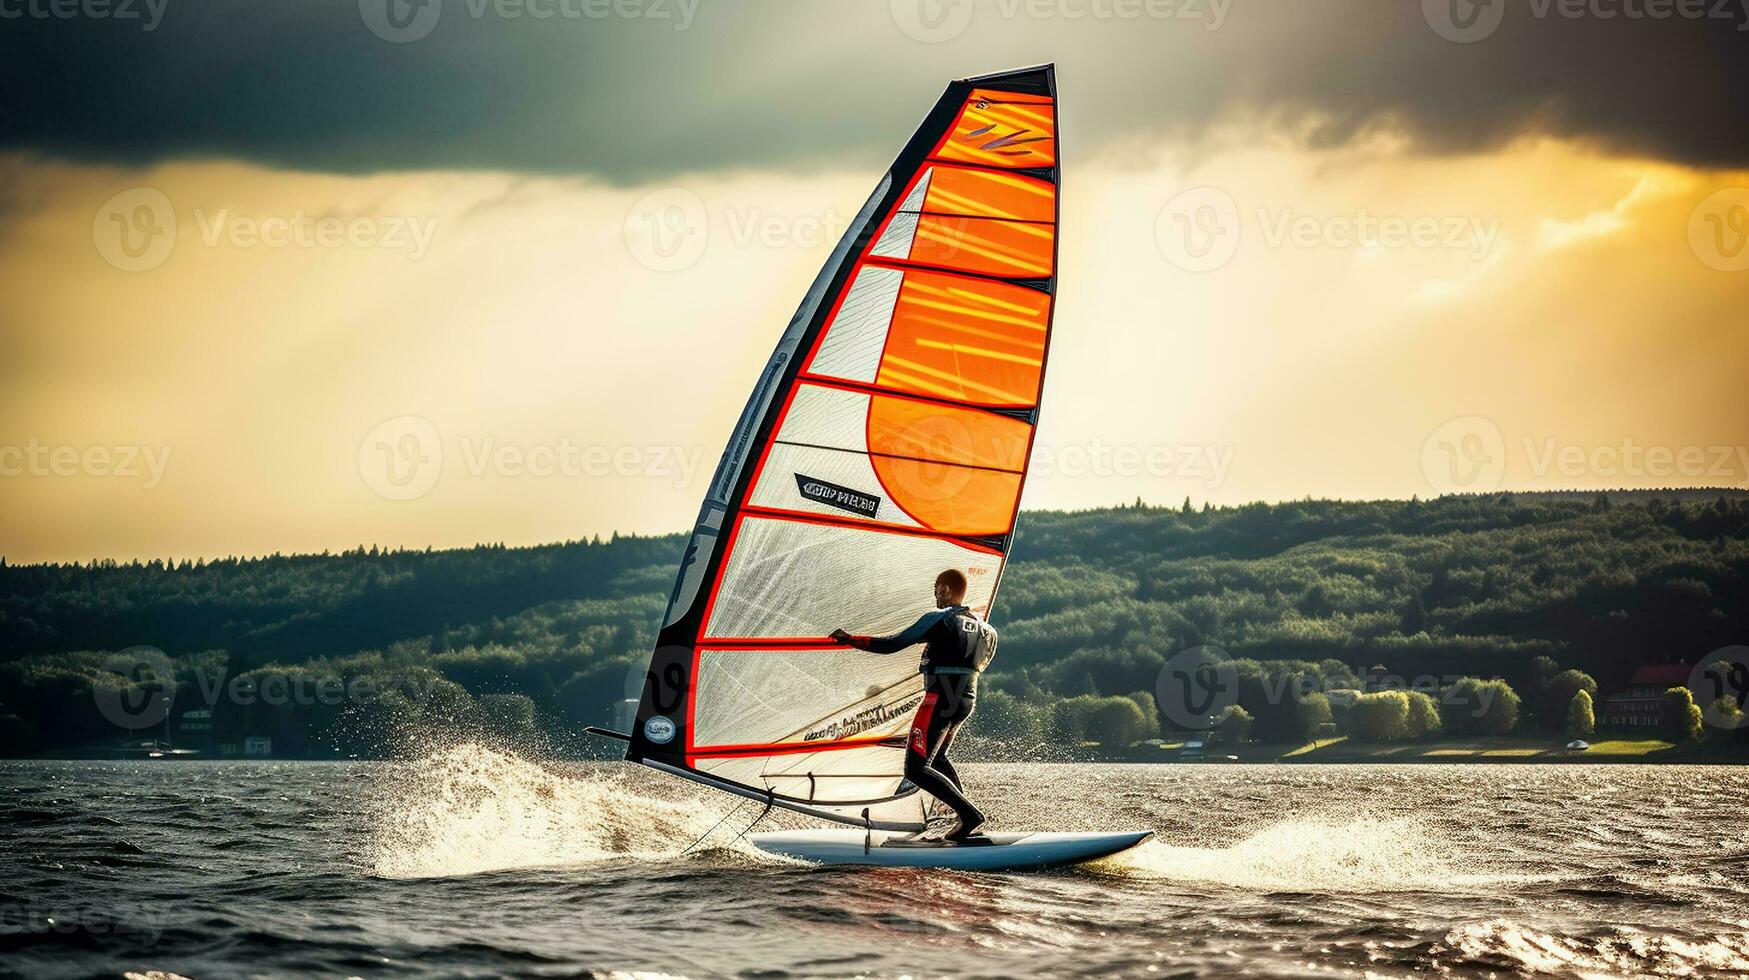 Windswept Serenity. Windsurfing Amidst Nature's Beauty with Billowing Sail photo